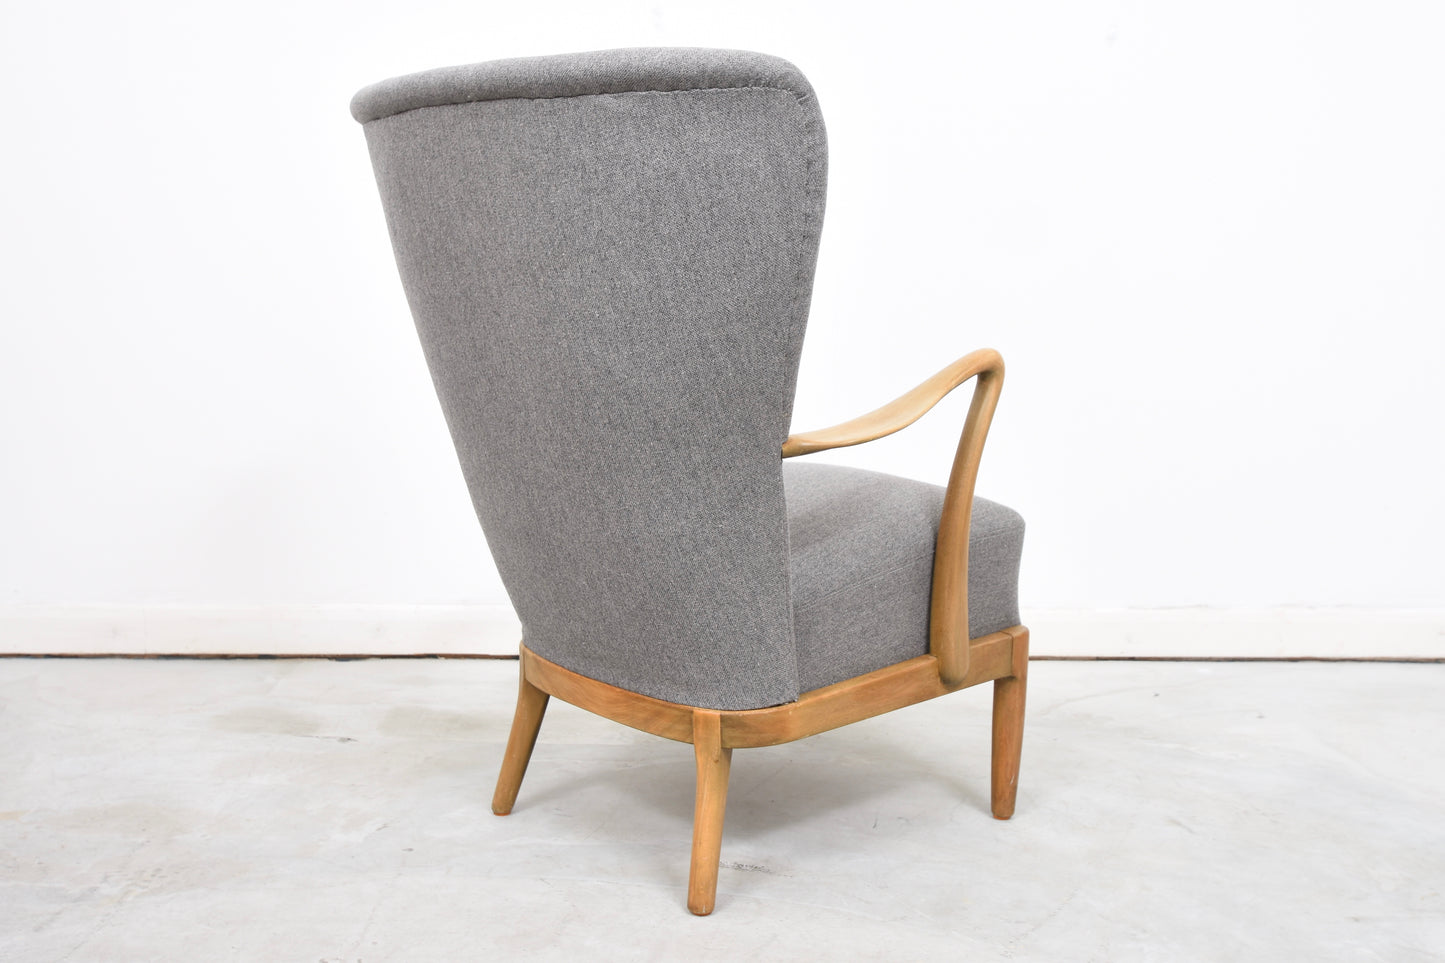 1940s wing back lounge chair by Fritz Hansen